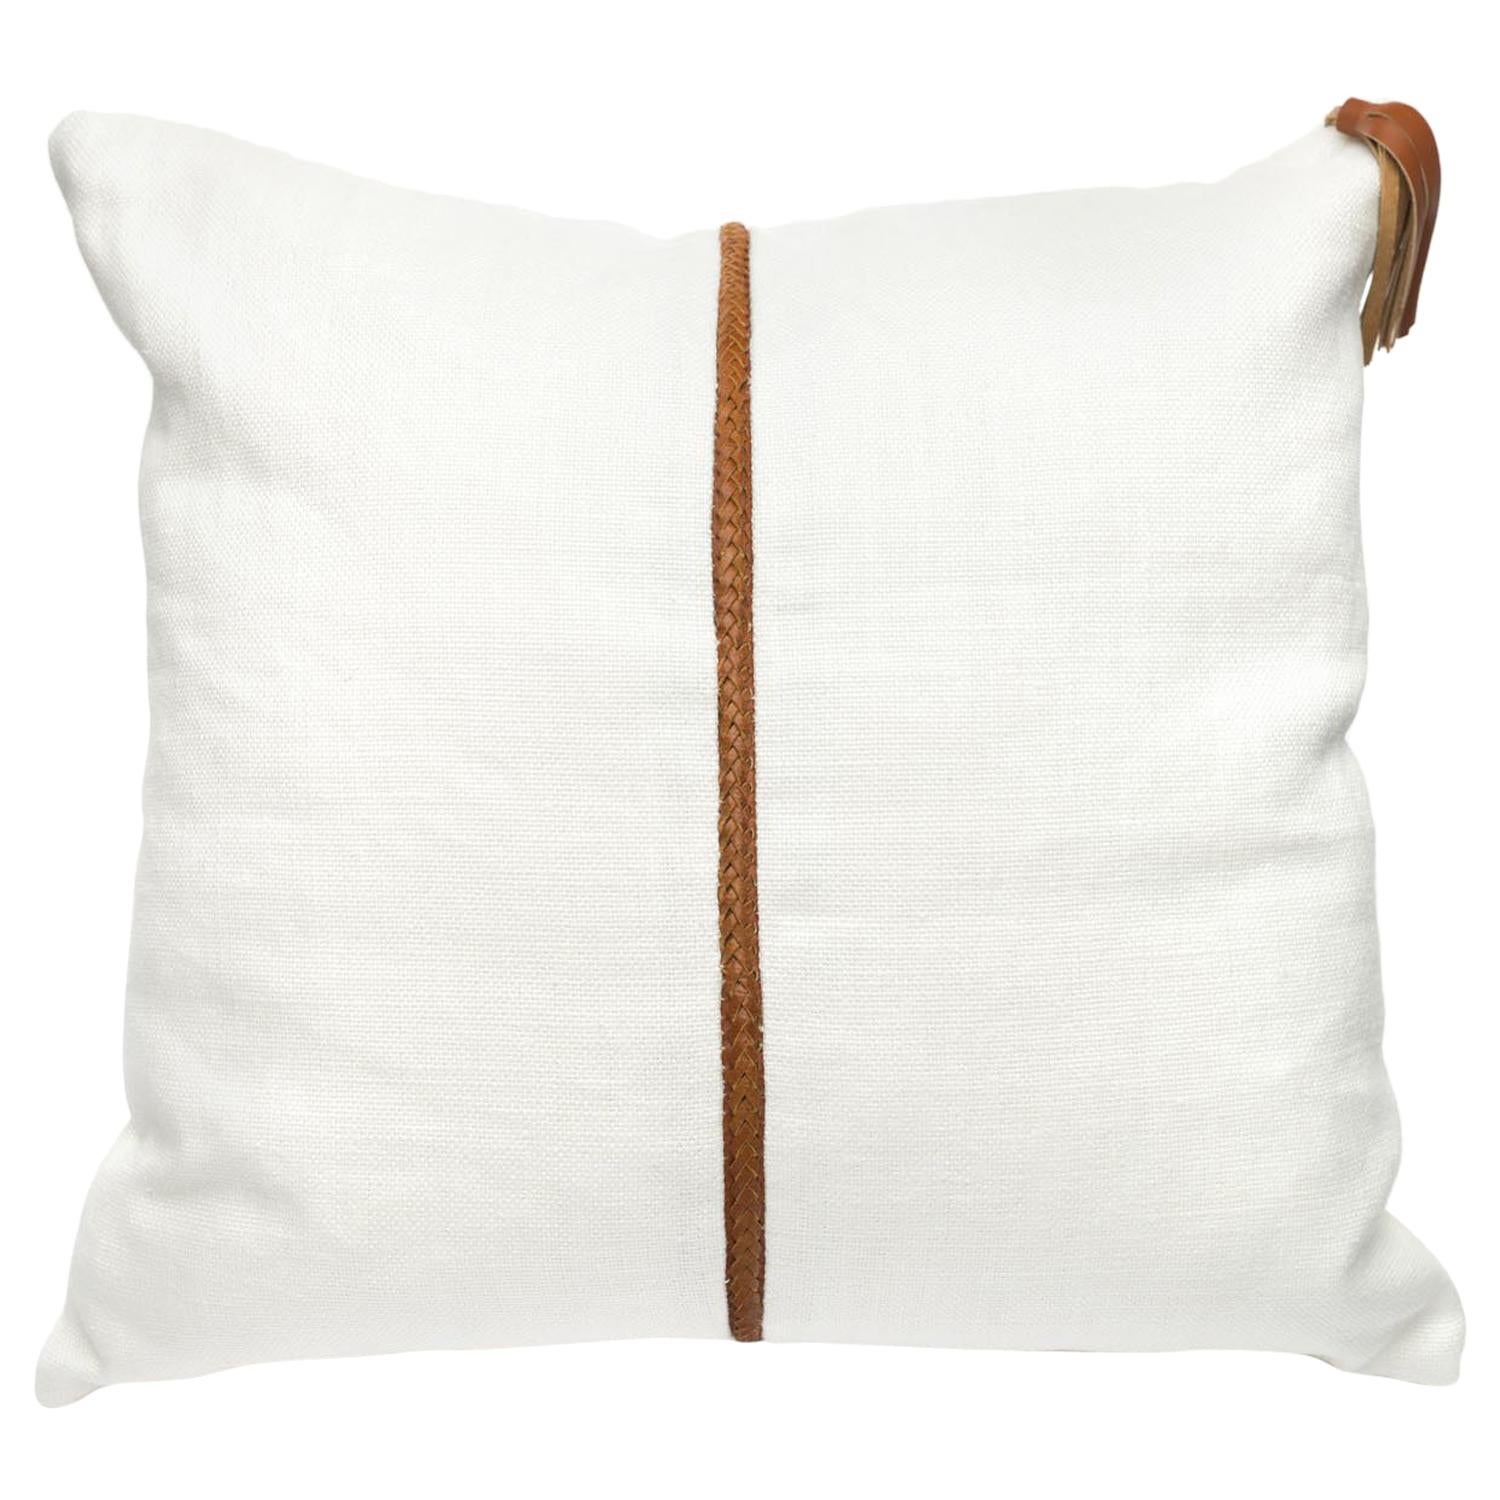 Linen Pillow with Leather Trimming and Tassel